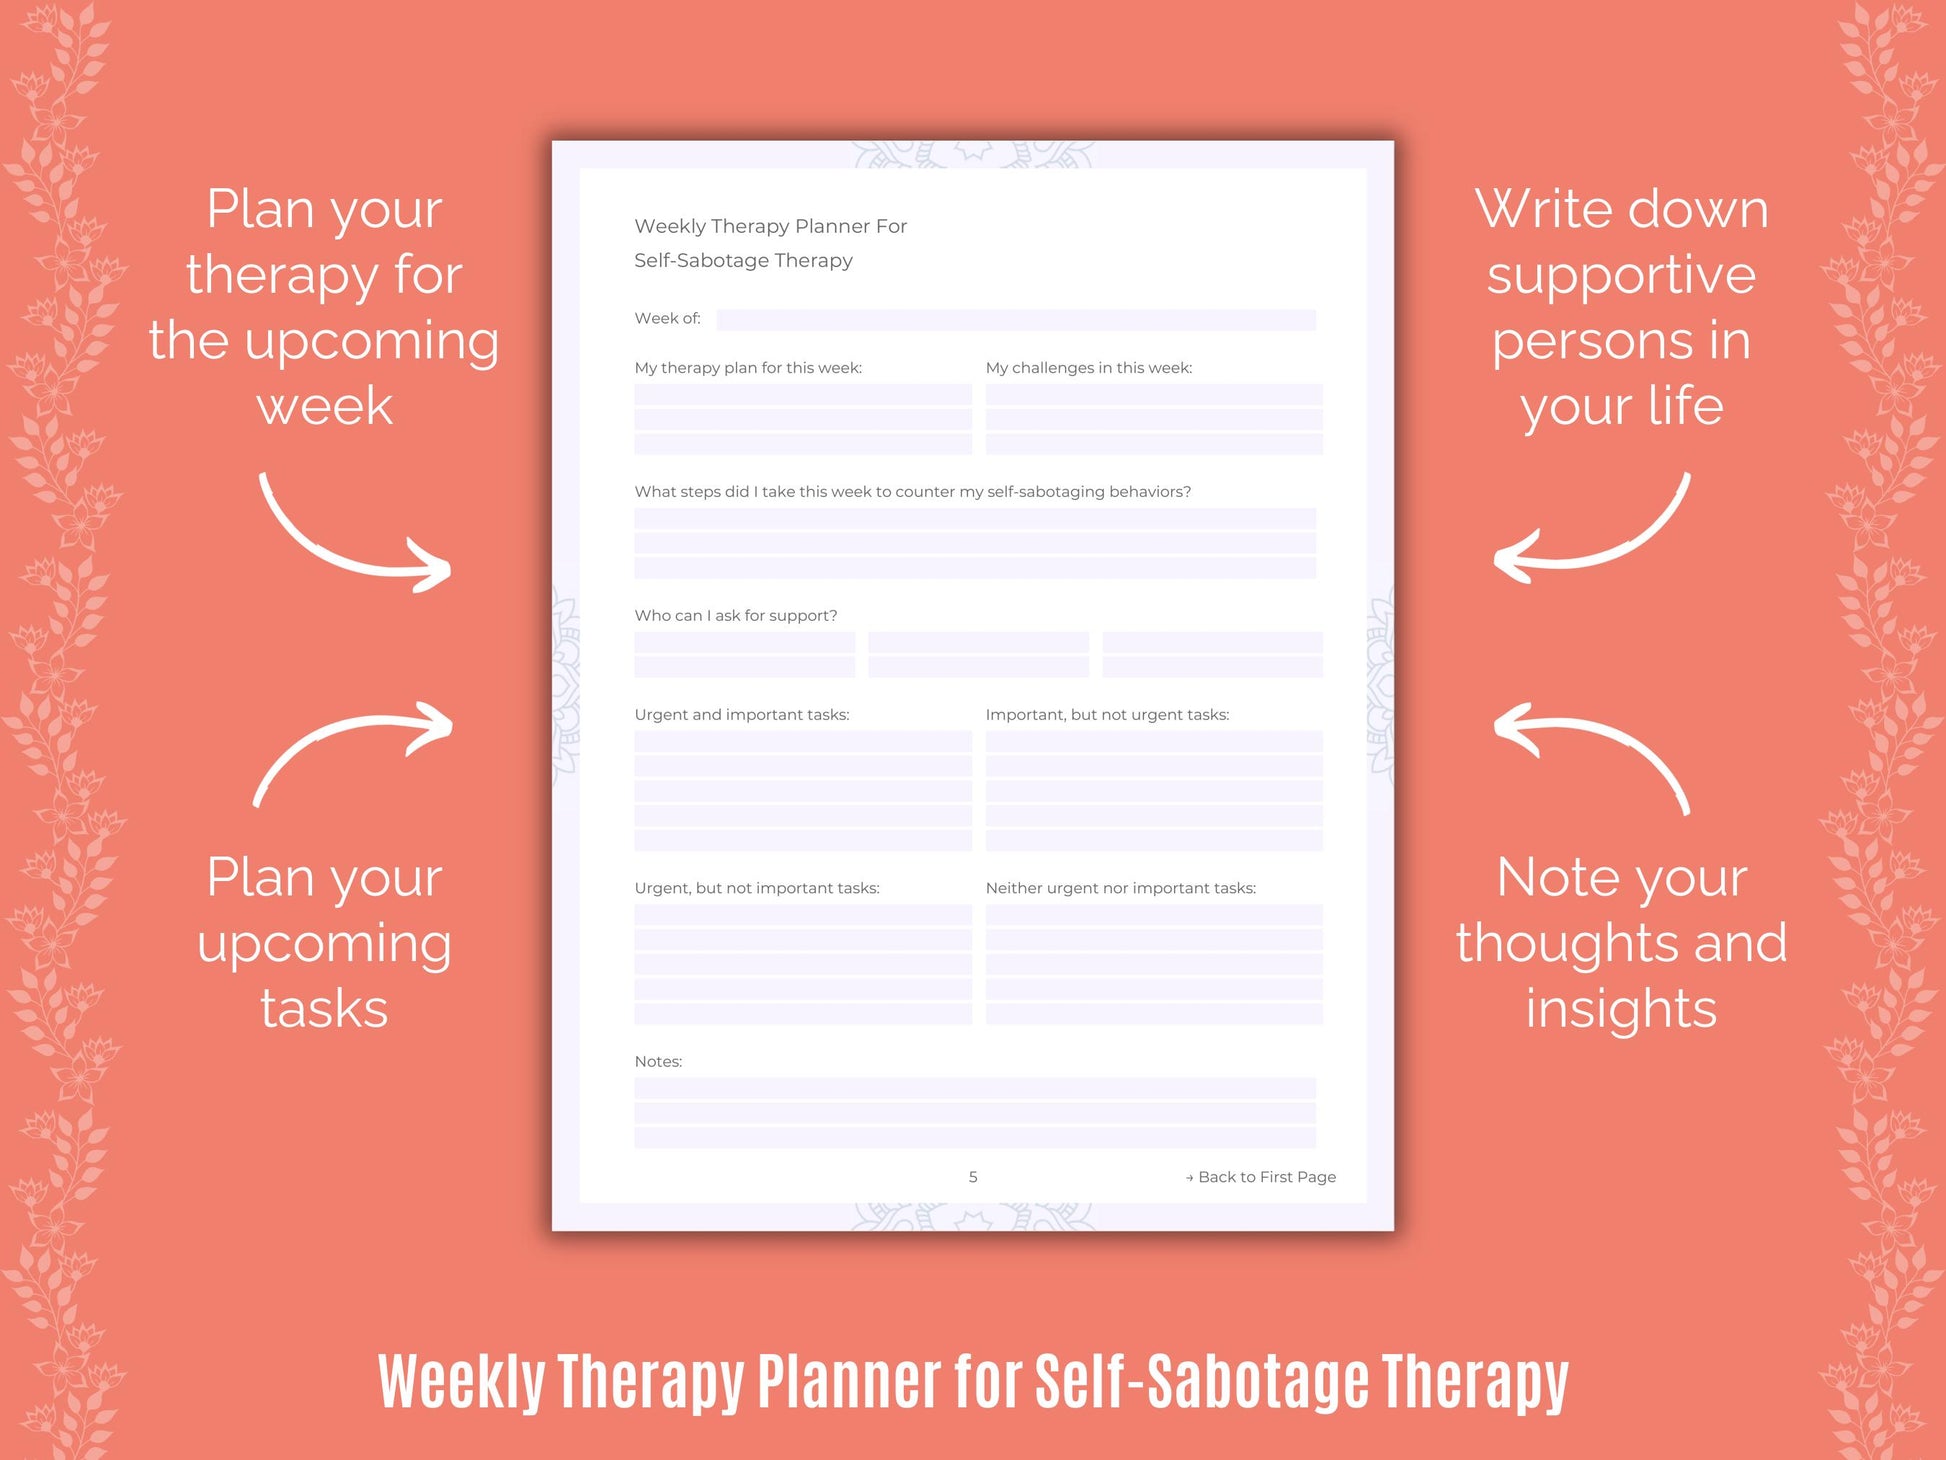 Planners, Cheat Sheet, Therapy, Resources, Self-Sabotage Therapy, Self-Sabotage Notes, Counseling, Workbooks, Journaling, Self-Sabotage Tools, Journals, Goal Setting, Templates